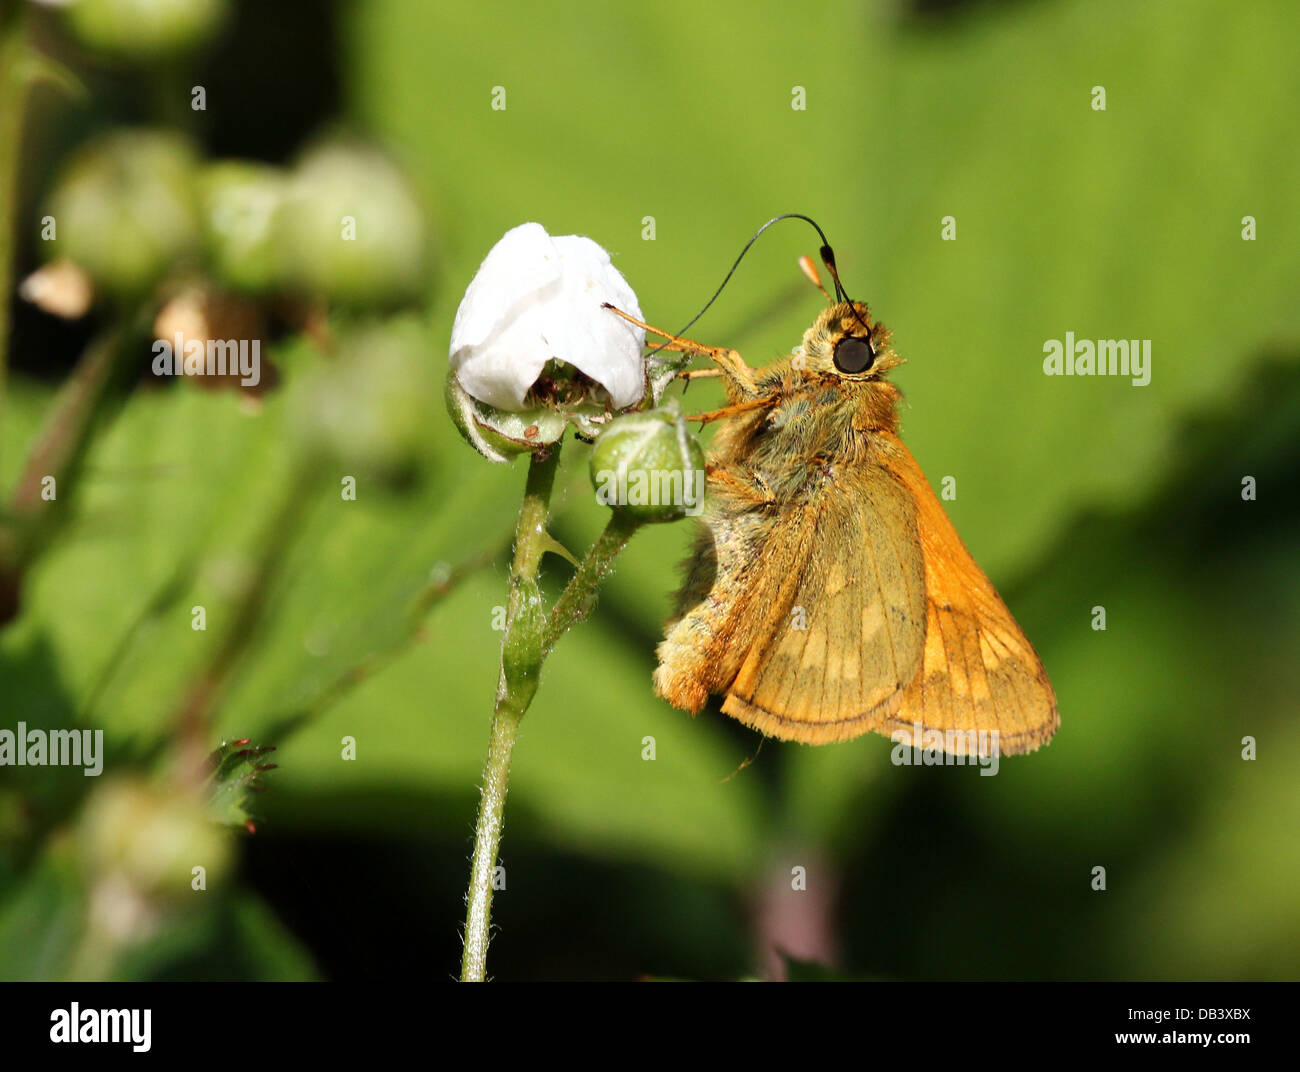 Macro close-up of a  Large Skipper butterfly (Ochlodes sylvanus) foraging on a white flower Stock Photo